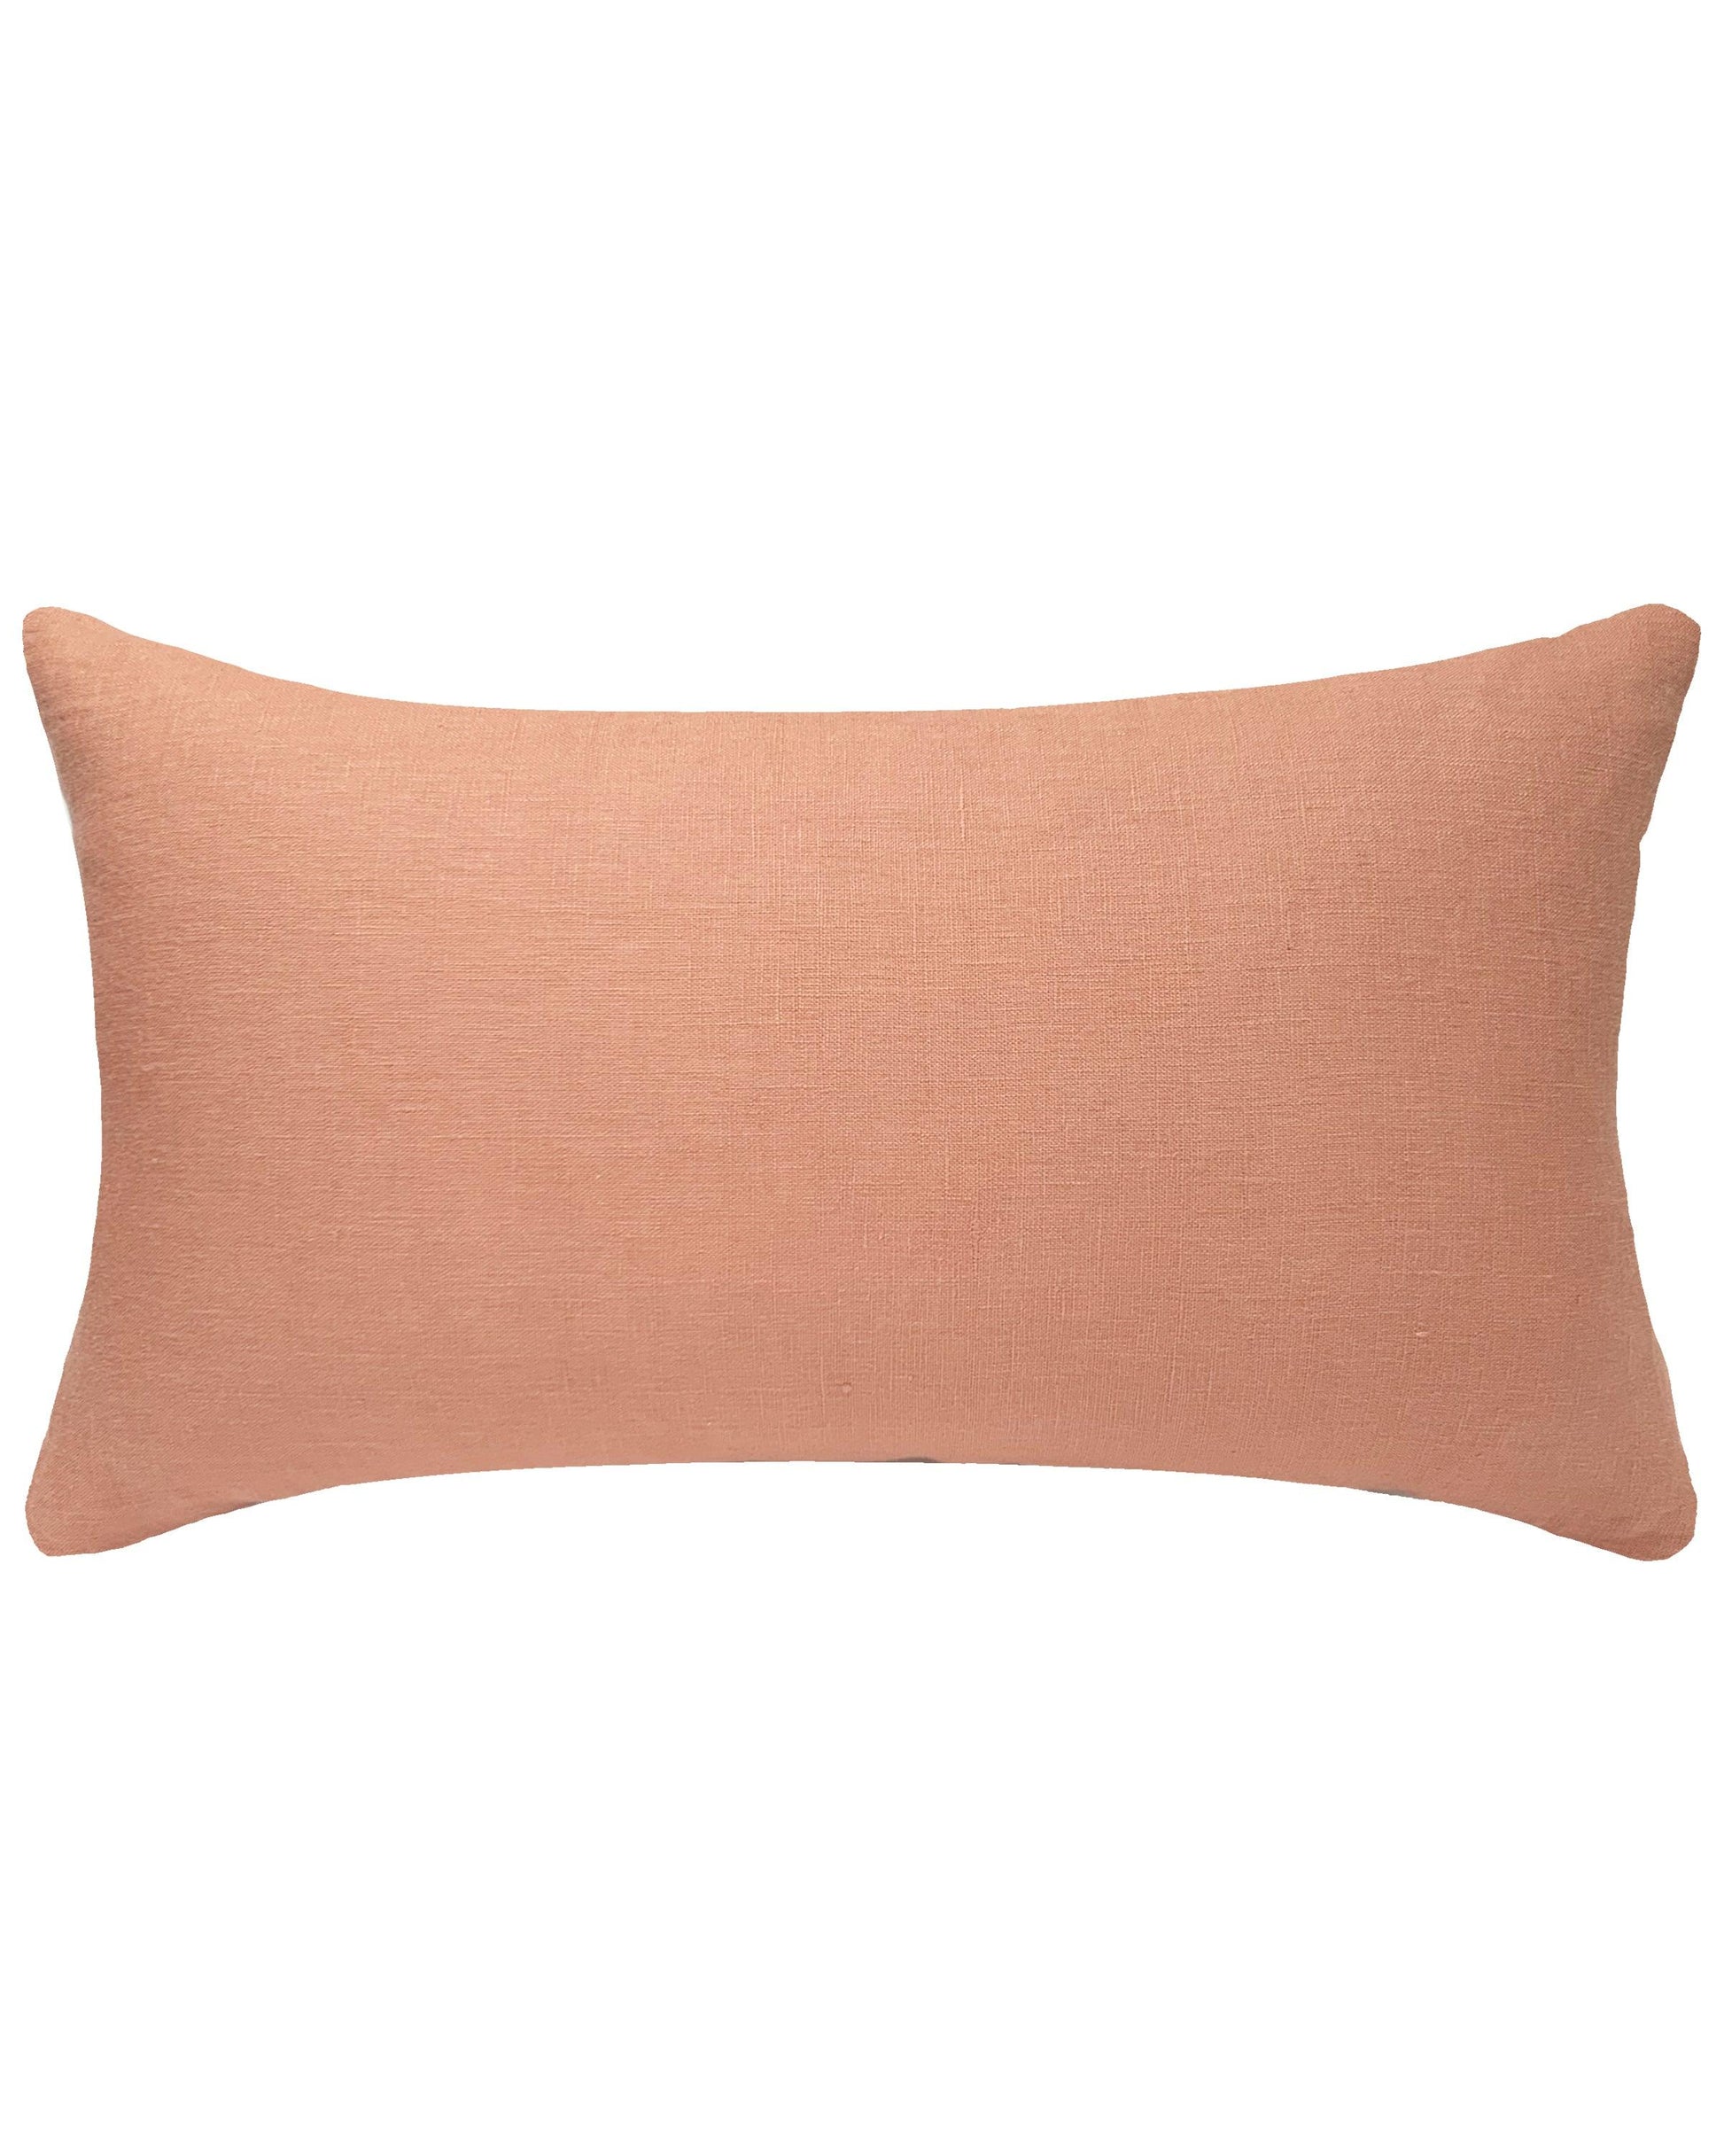 PILLOWPIA cowrie embroidered lumbar pillow in sandalwood